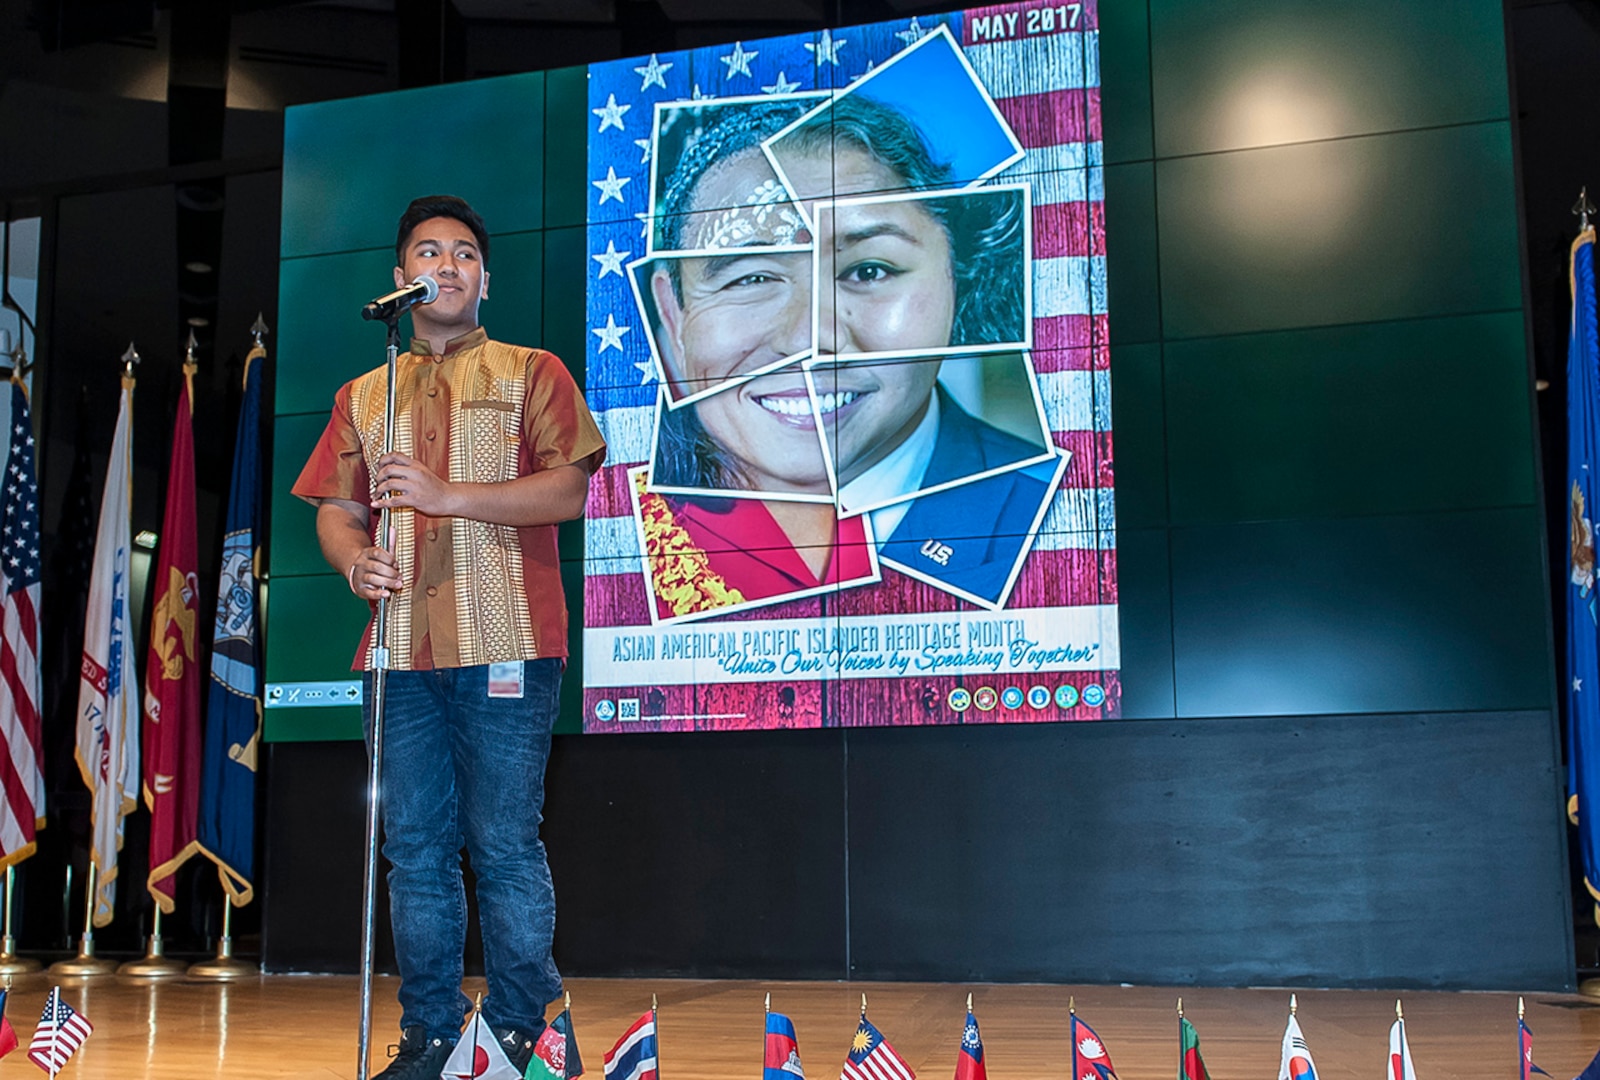 Tanaka Nhong, a founding member of the Khmer Student Association at The Ohio State University, sings the famous Cambodian song, “Louch Snae Doung Chan (The Moon that Stole My Heart).” Nhong's performance took place during the Asian American and Pacific Islander heritage month program at Defense Supply Center Columbus on May 10.